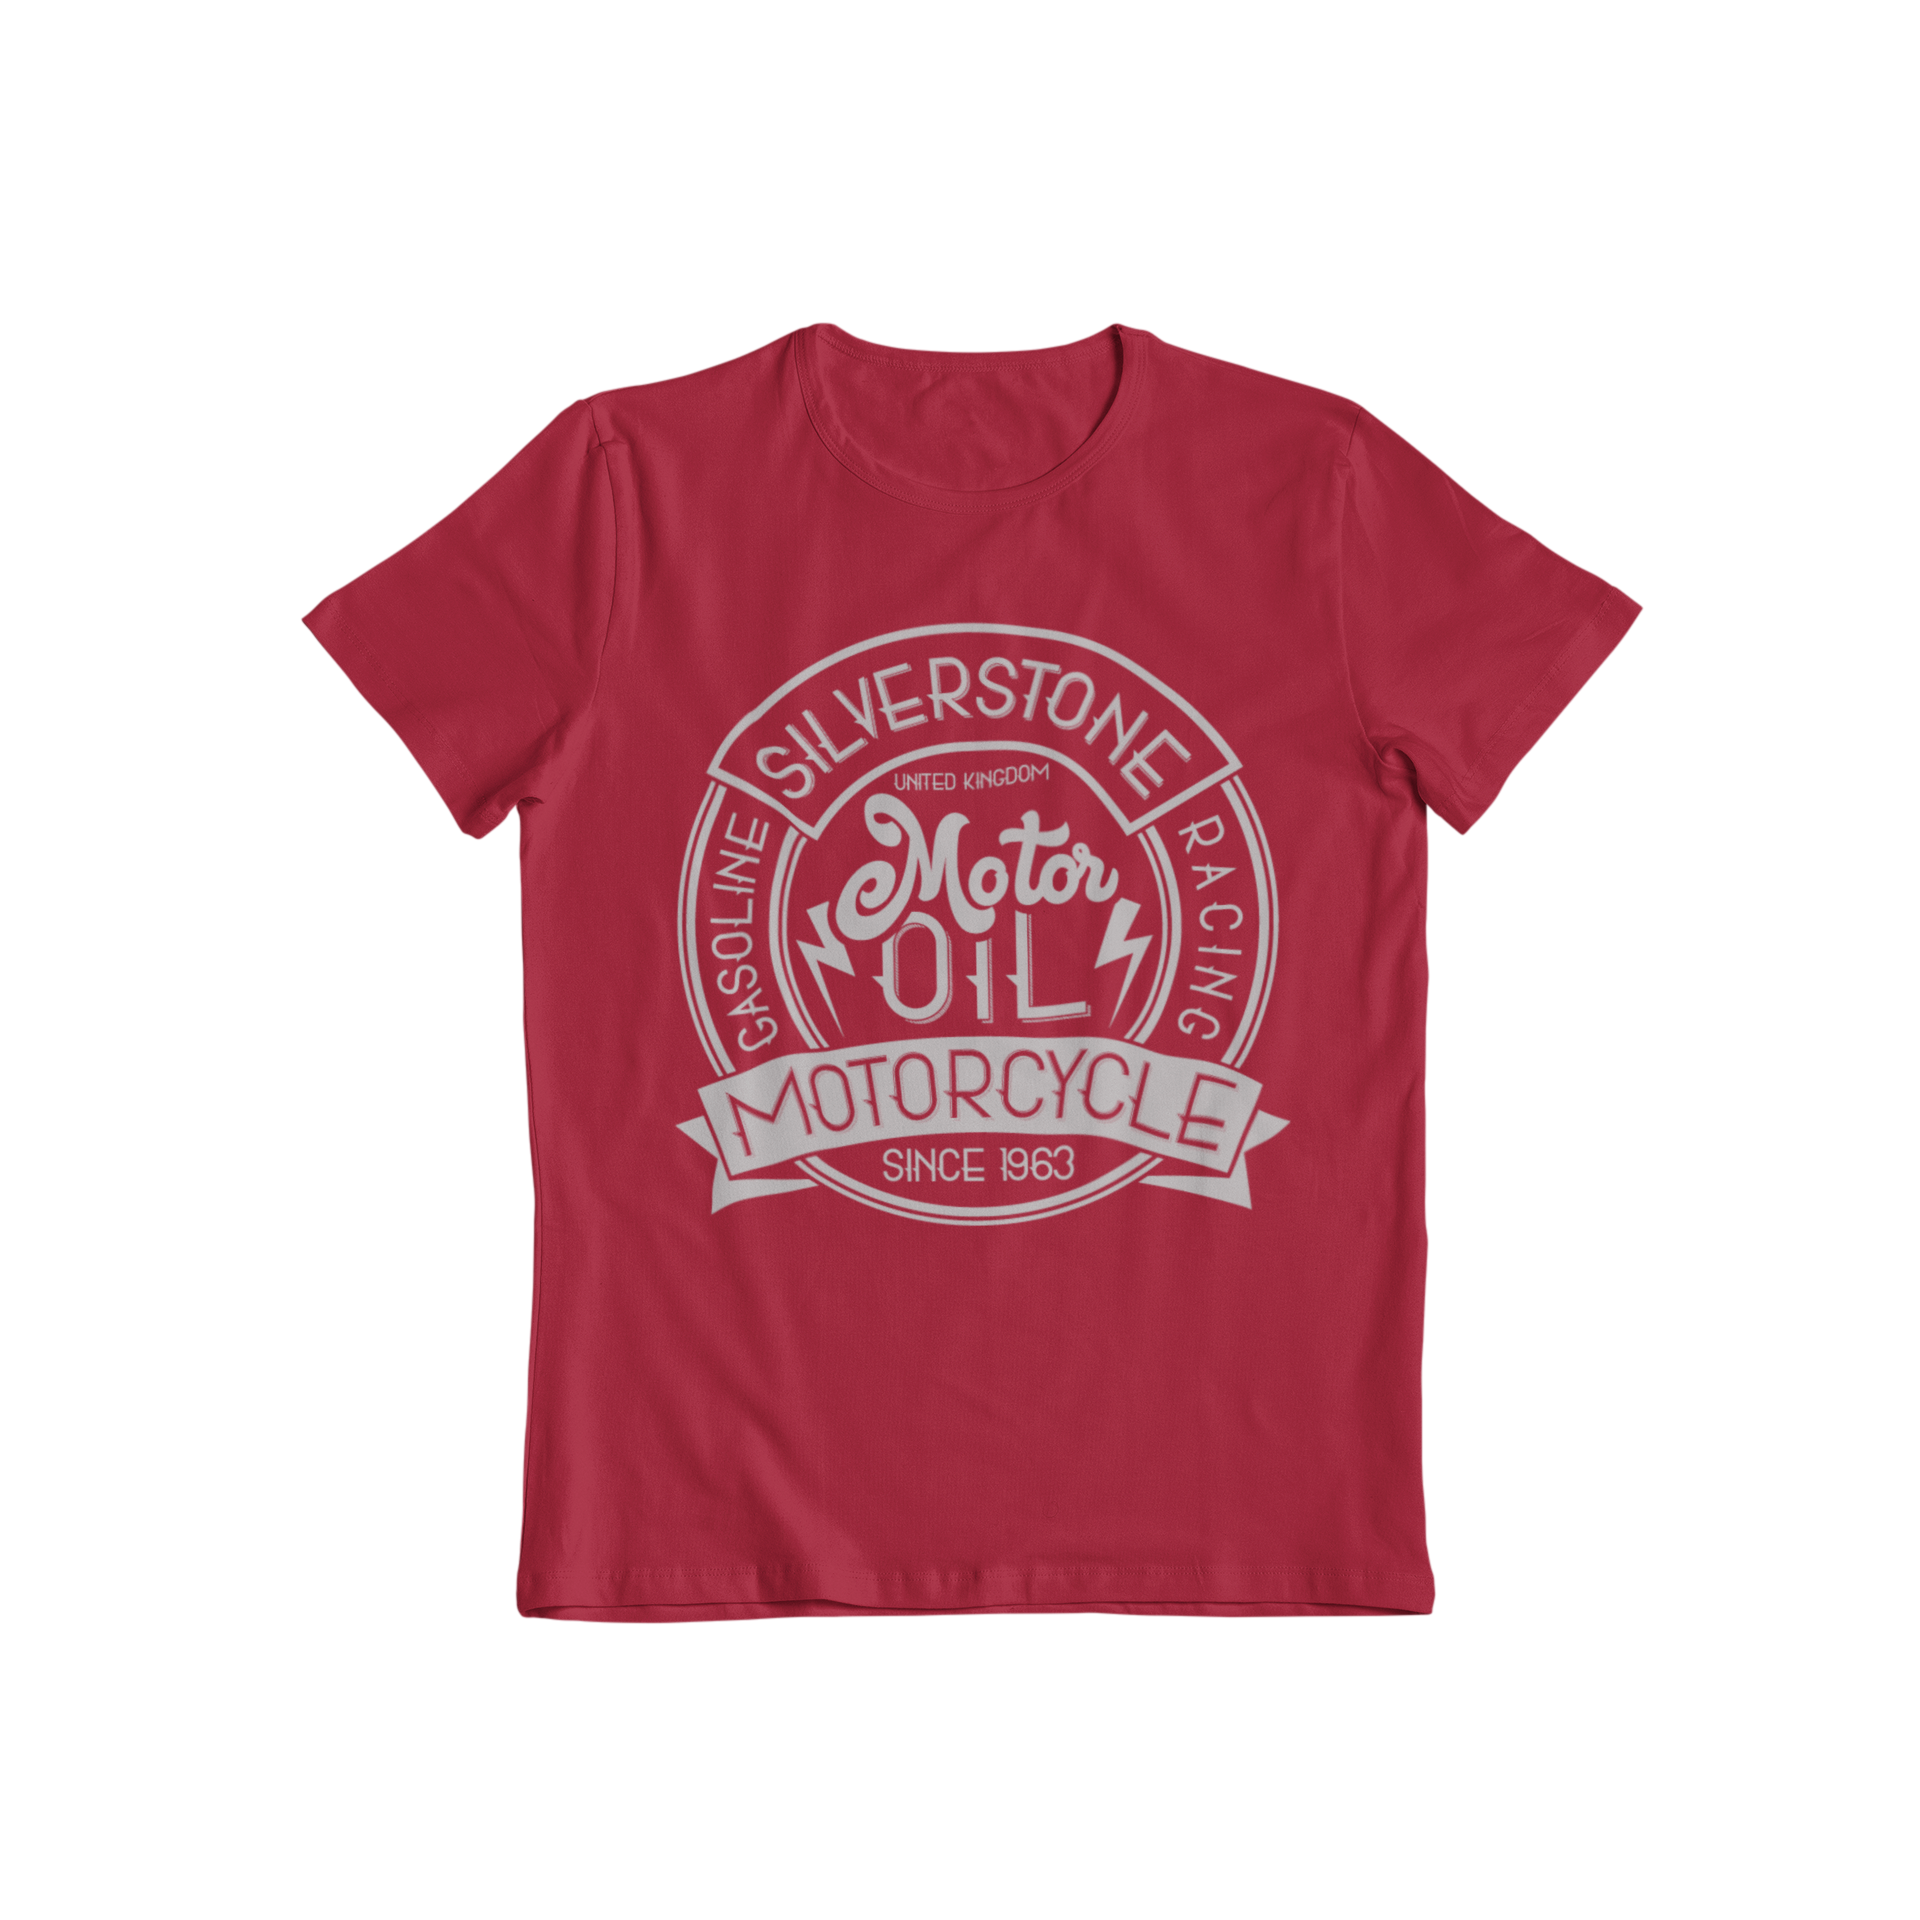 Looking for a unique graphic tee that reflects your passion for automotive design? Teevolution offers a one-of-a-kind, Silverstone motor oil logo tee that is perfect for any biker. Shop now and show off your love for the open road!